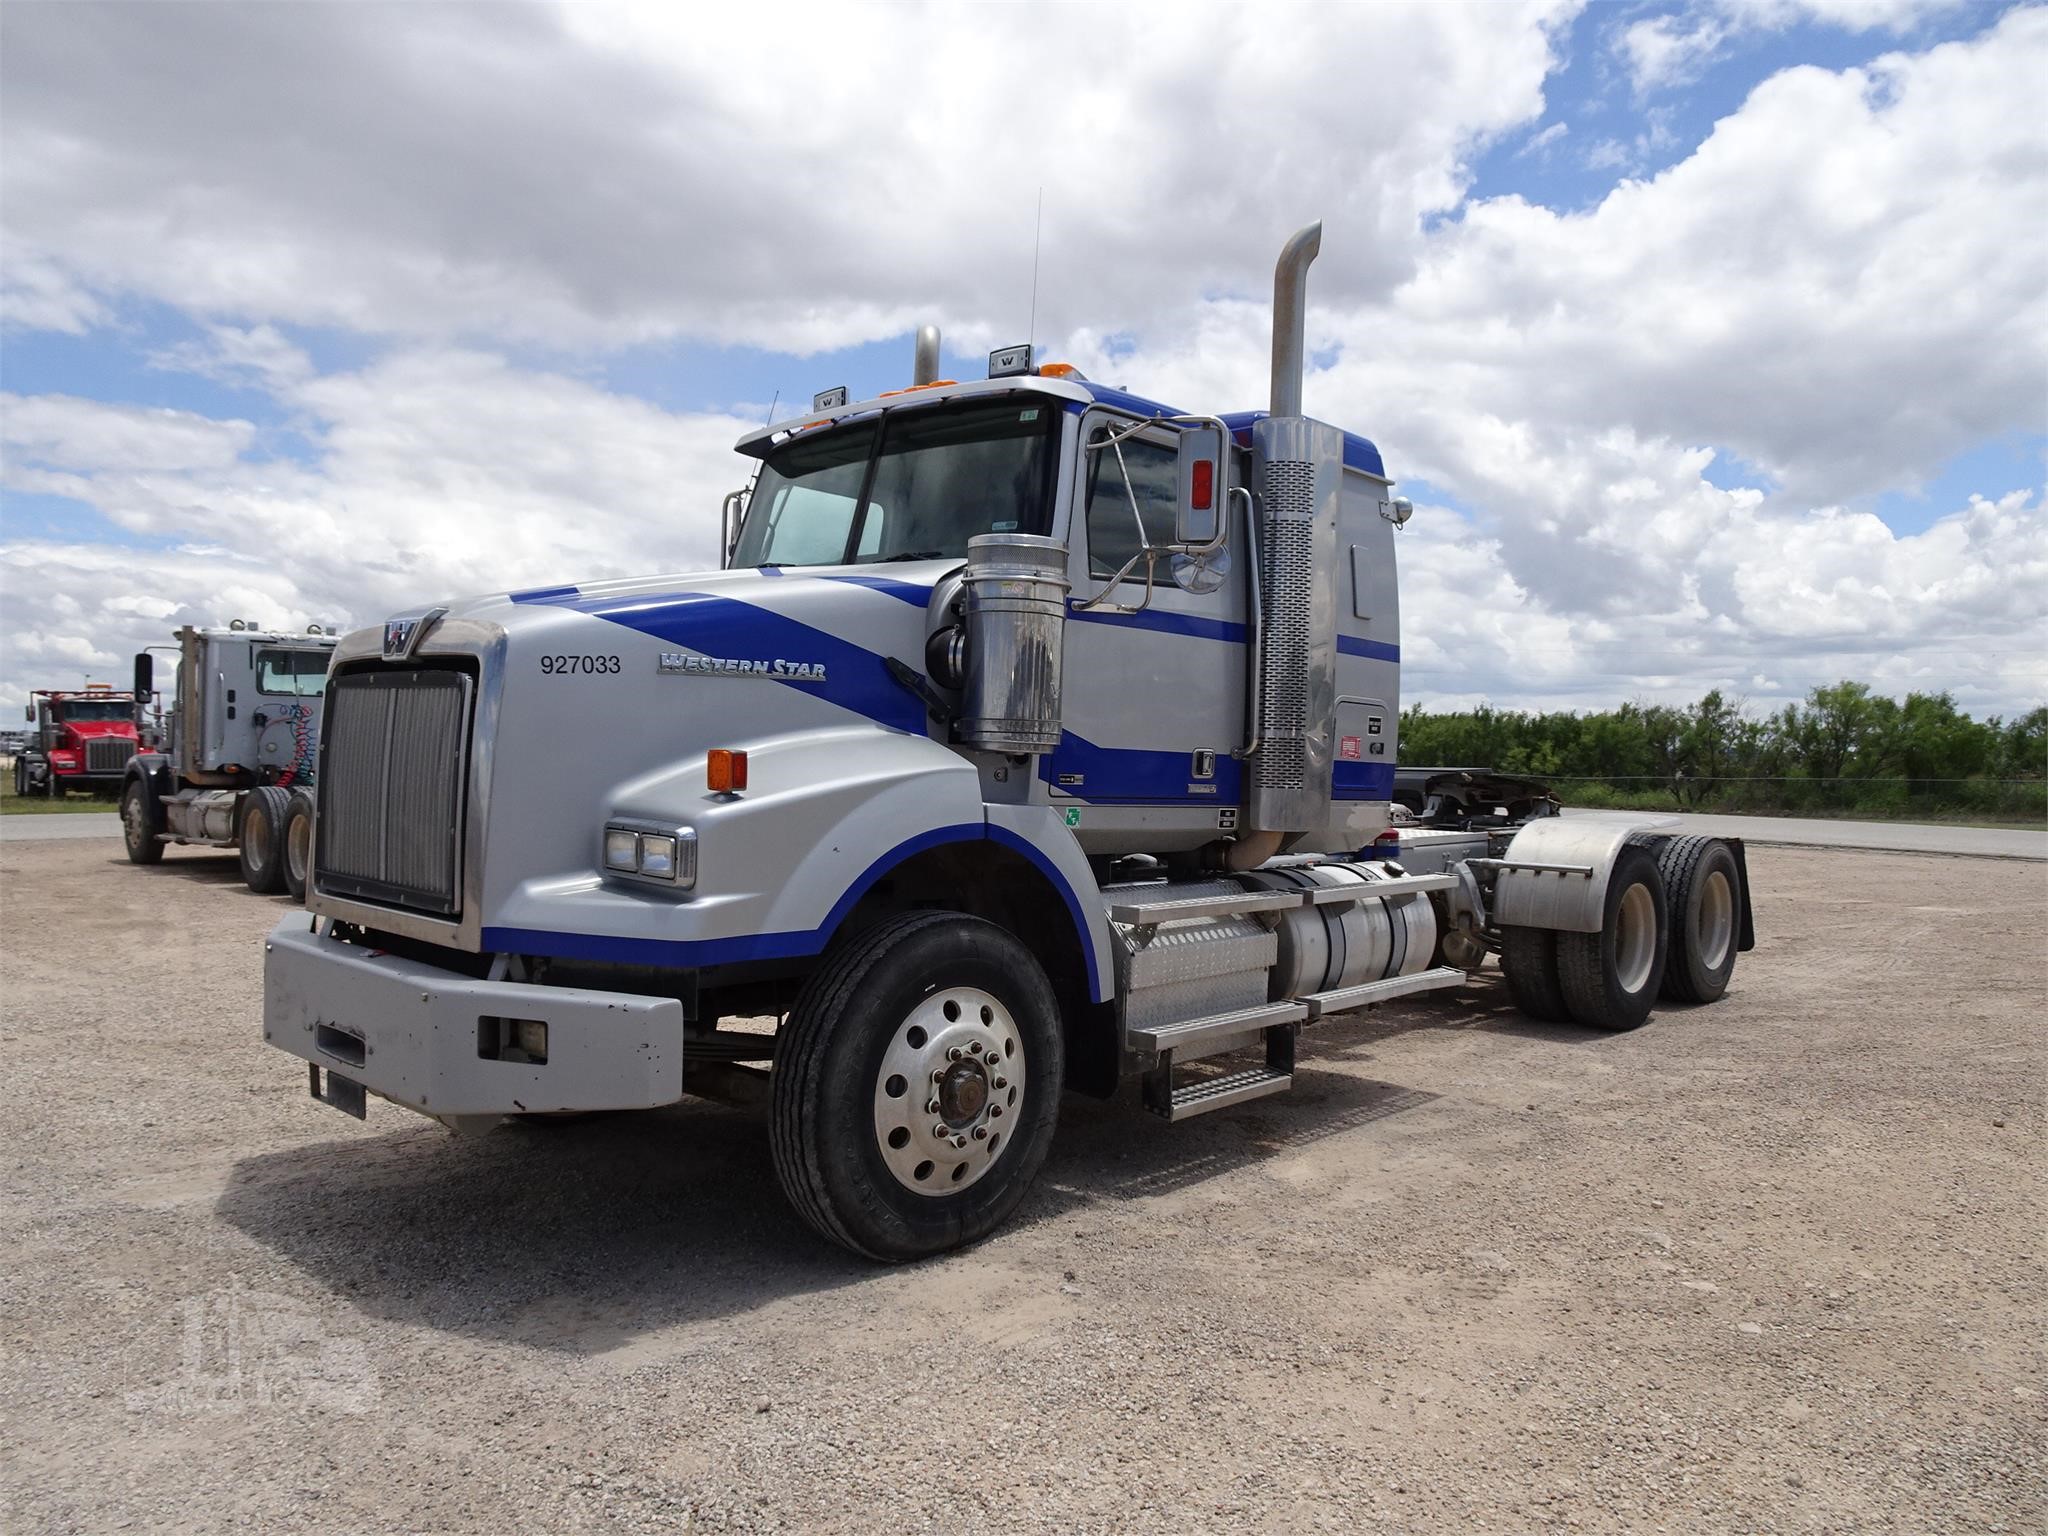 Western Star Conventional Trucks W Sleeper For Sale In Usa 288 Listings Truckpaper Com Page 1 Of 12